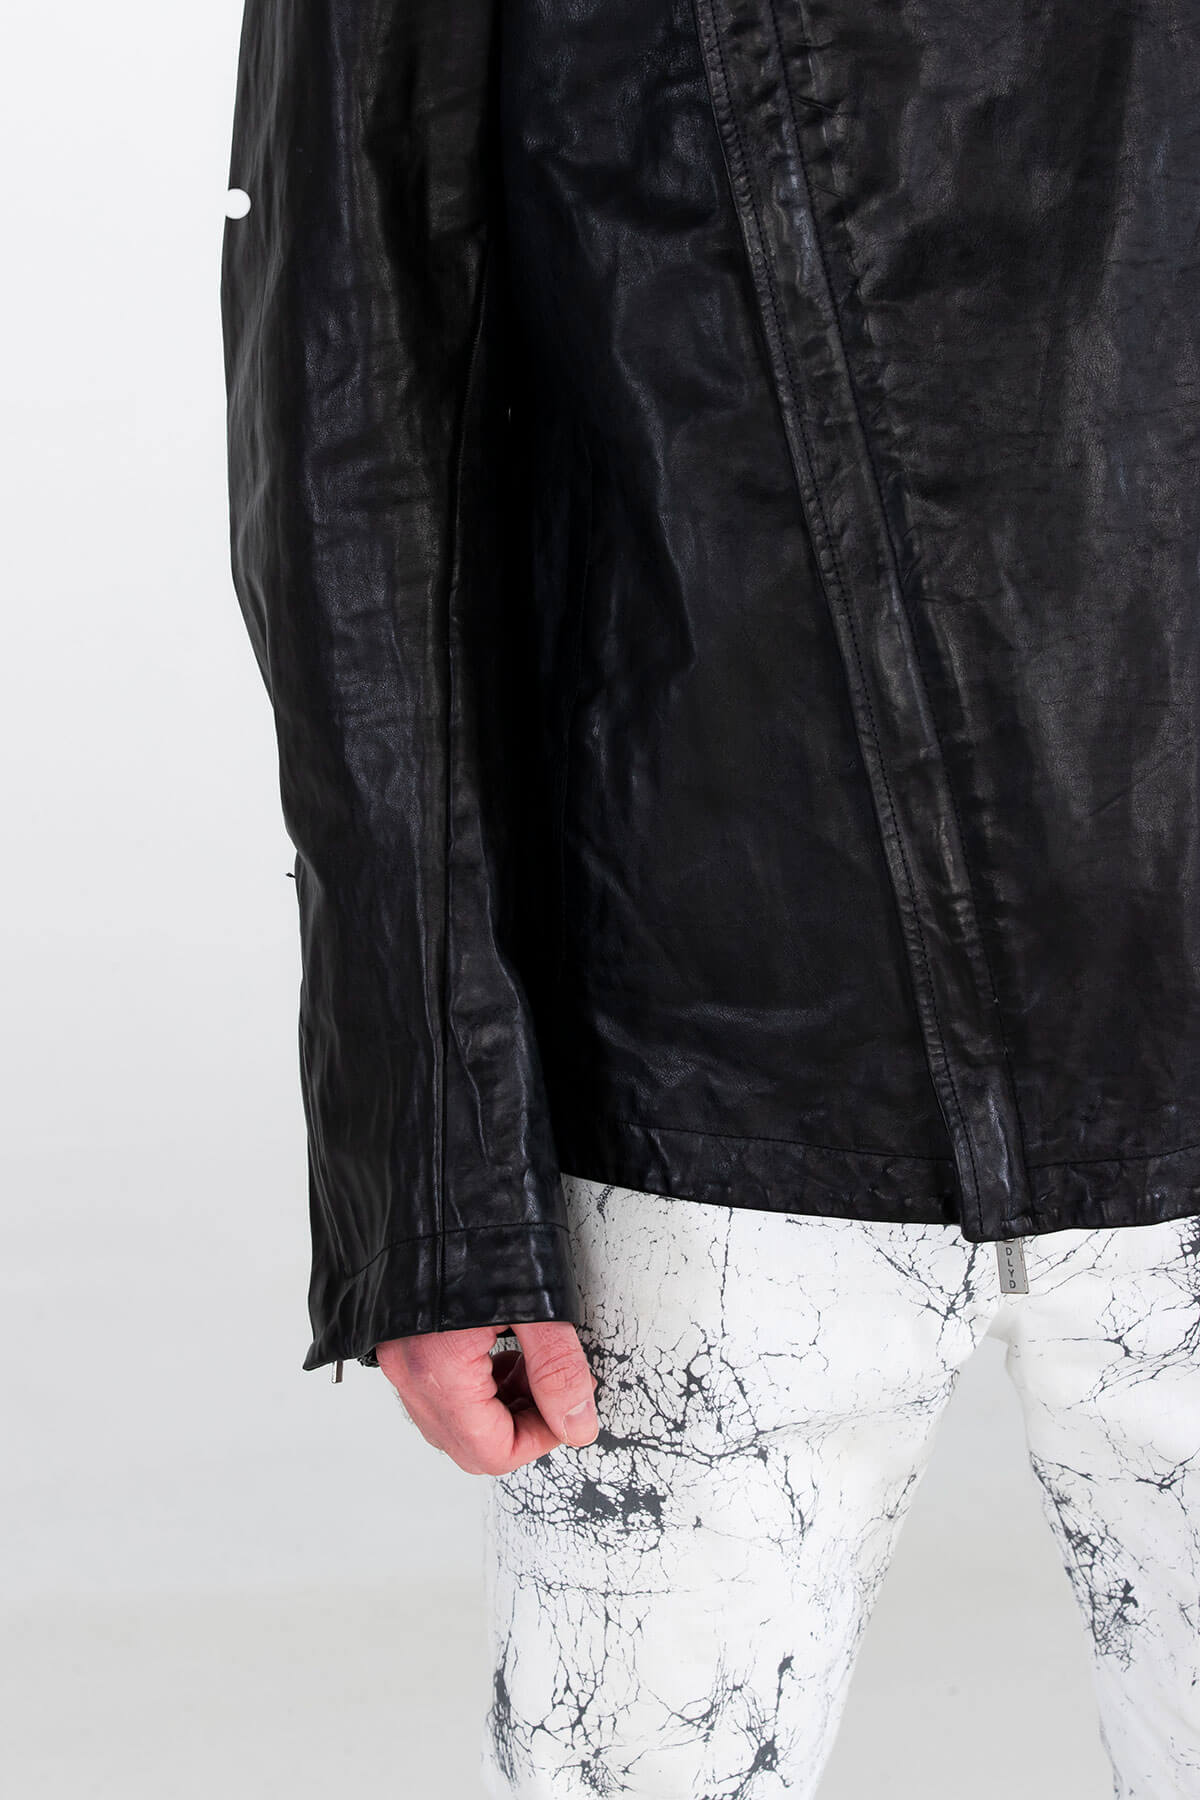 CLASSIC LEATHER JACKET - HAND CRAFTED - ARCHIVE JACKET - MJB